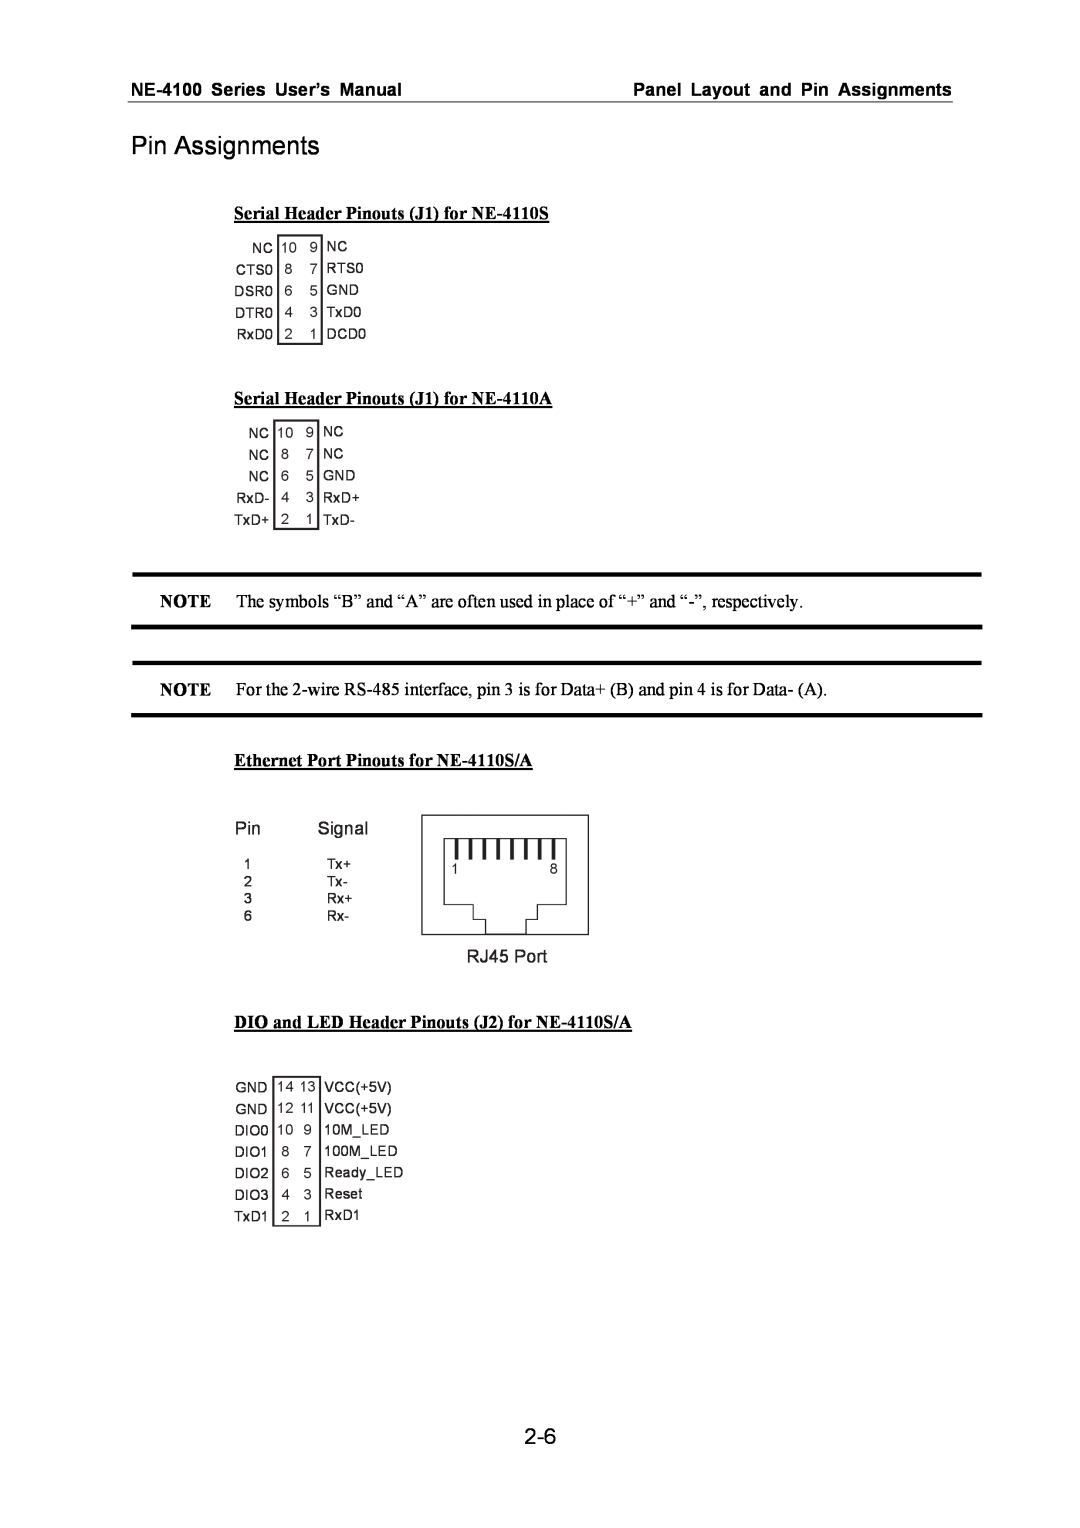 Moxa Technologies user manual NE-4100 Series User’s Manual, Panel Layout and Pin Assignments, Pin Signal, RJ45 Port 